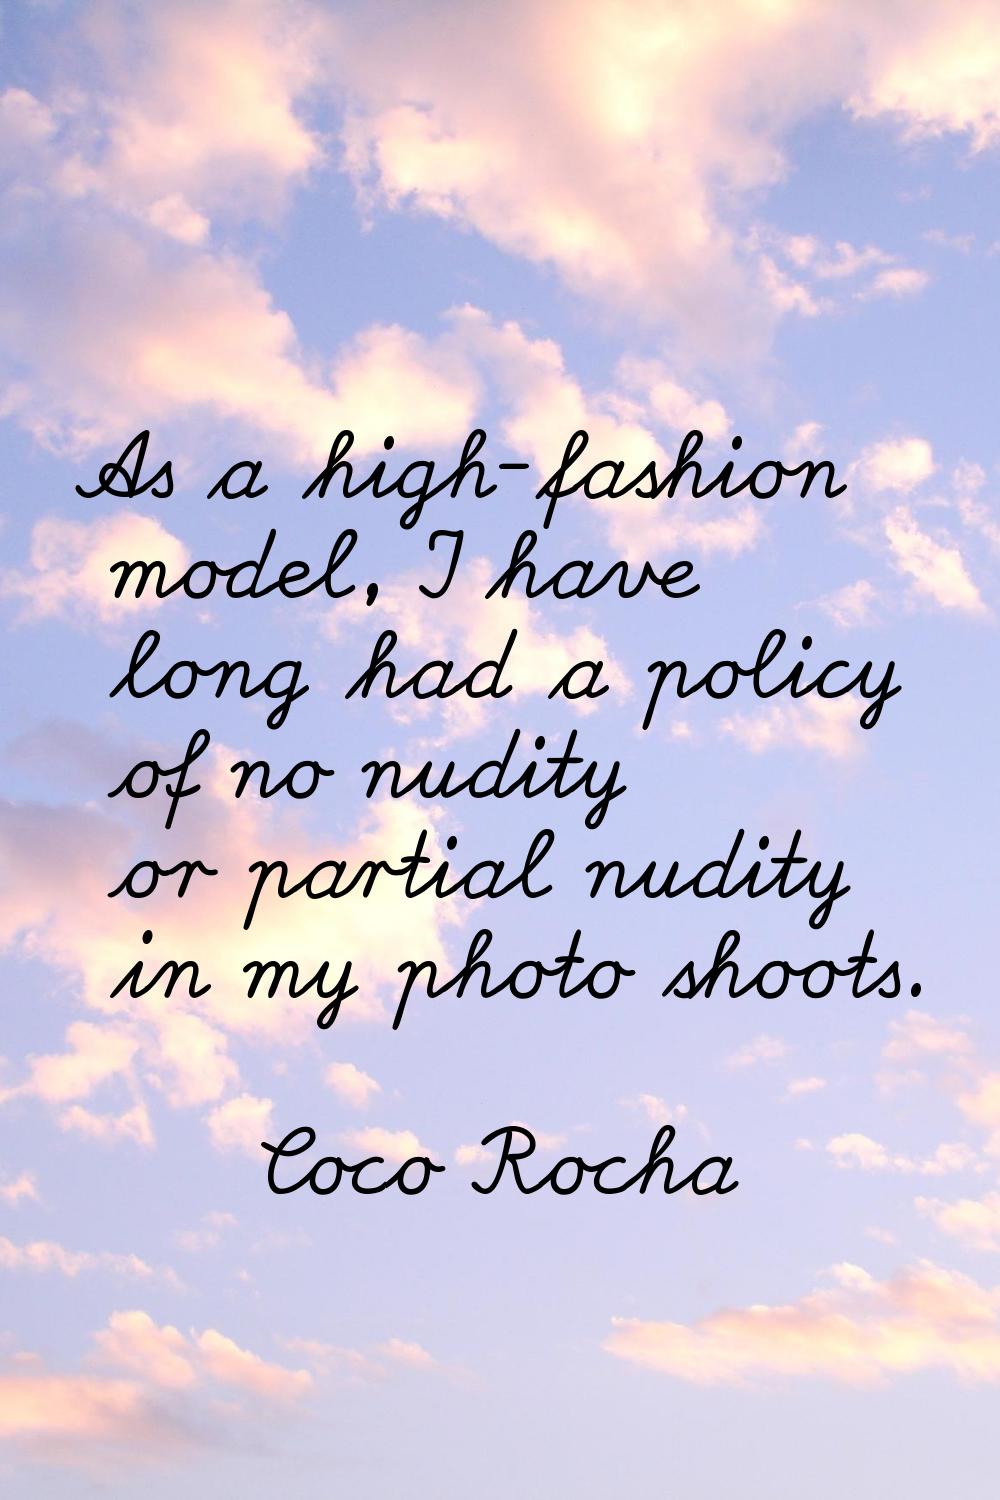 As a high-fashion model, I have long had a policy of no nudity or partial nudity in my photo shoots